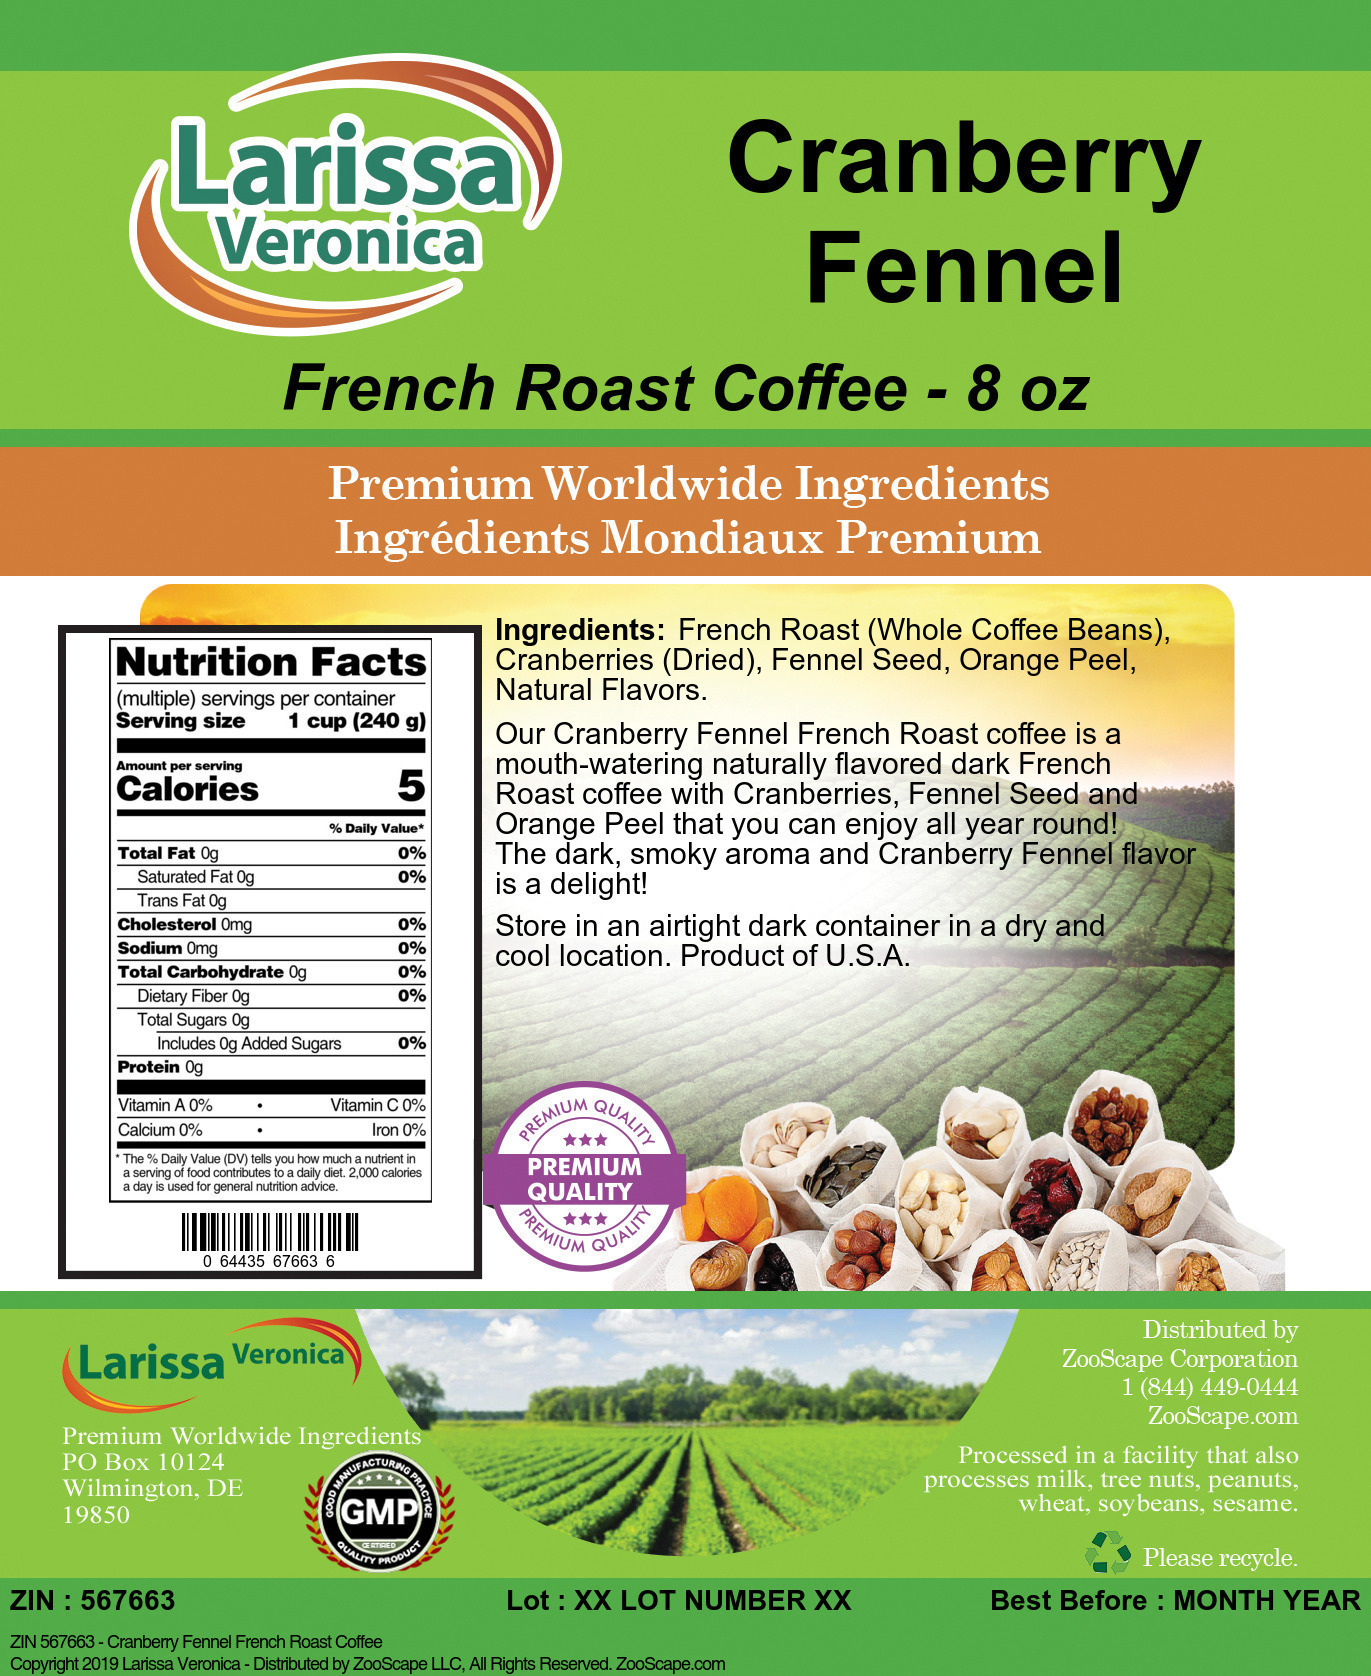 Cranberry Fennel French Roast Coffee - Label